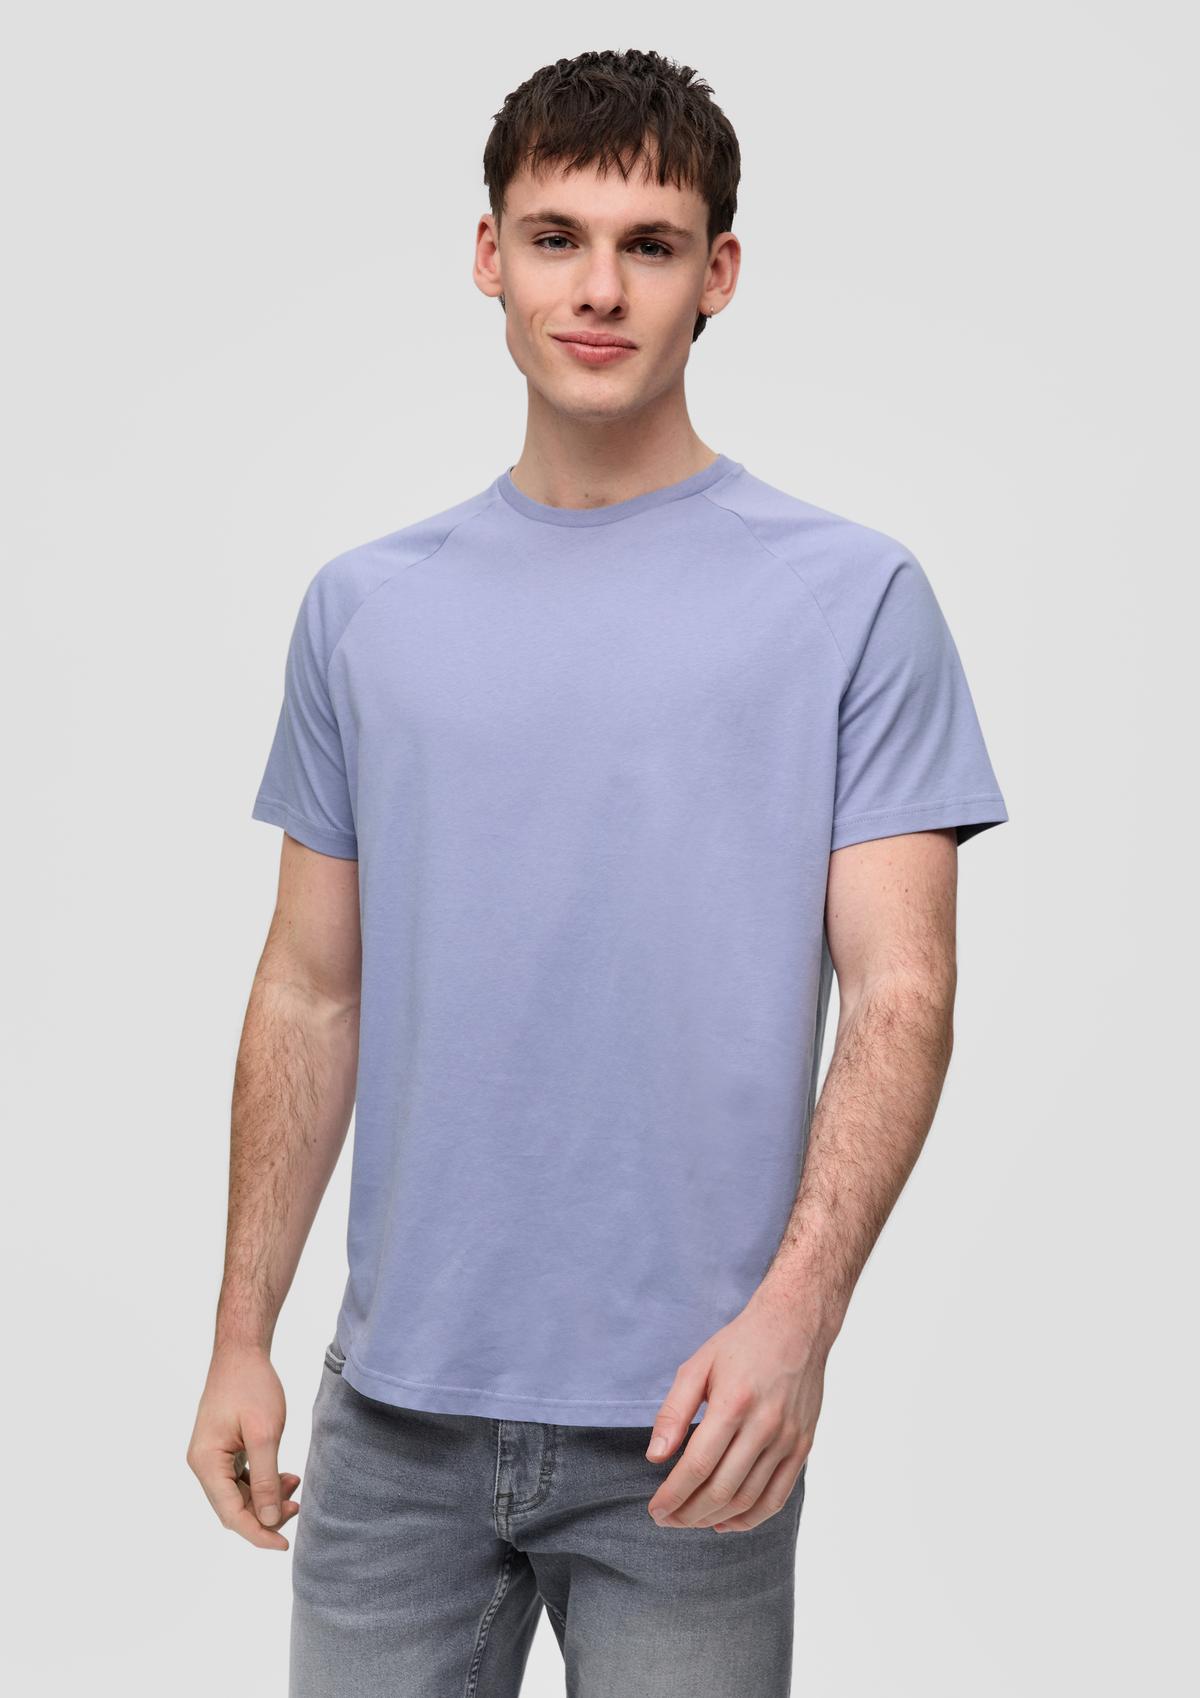 Classic T-shirt made of pure cotton